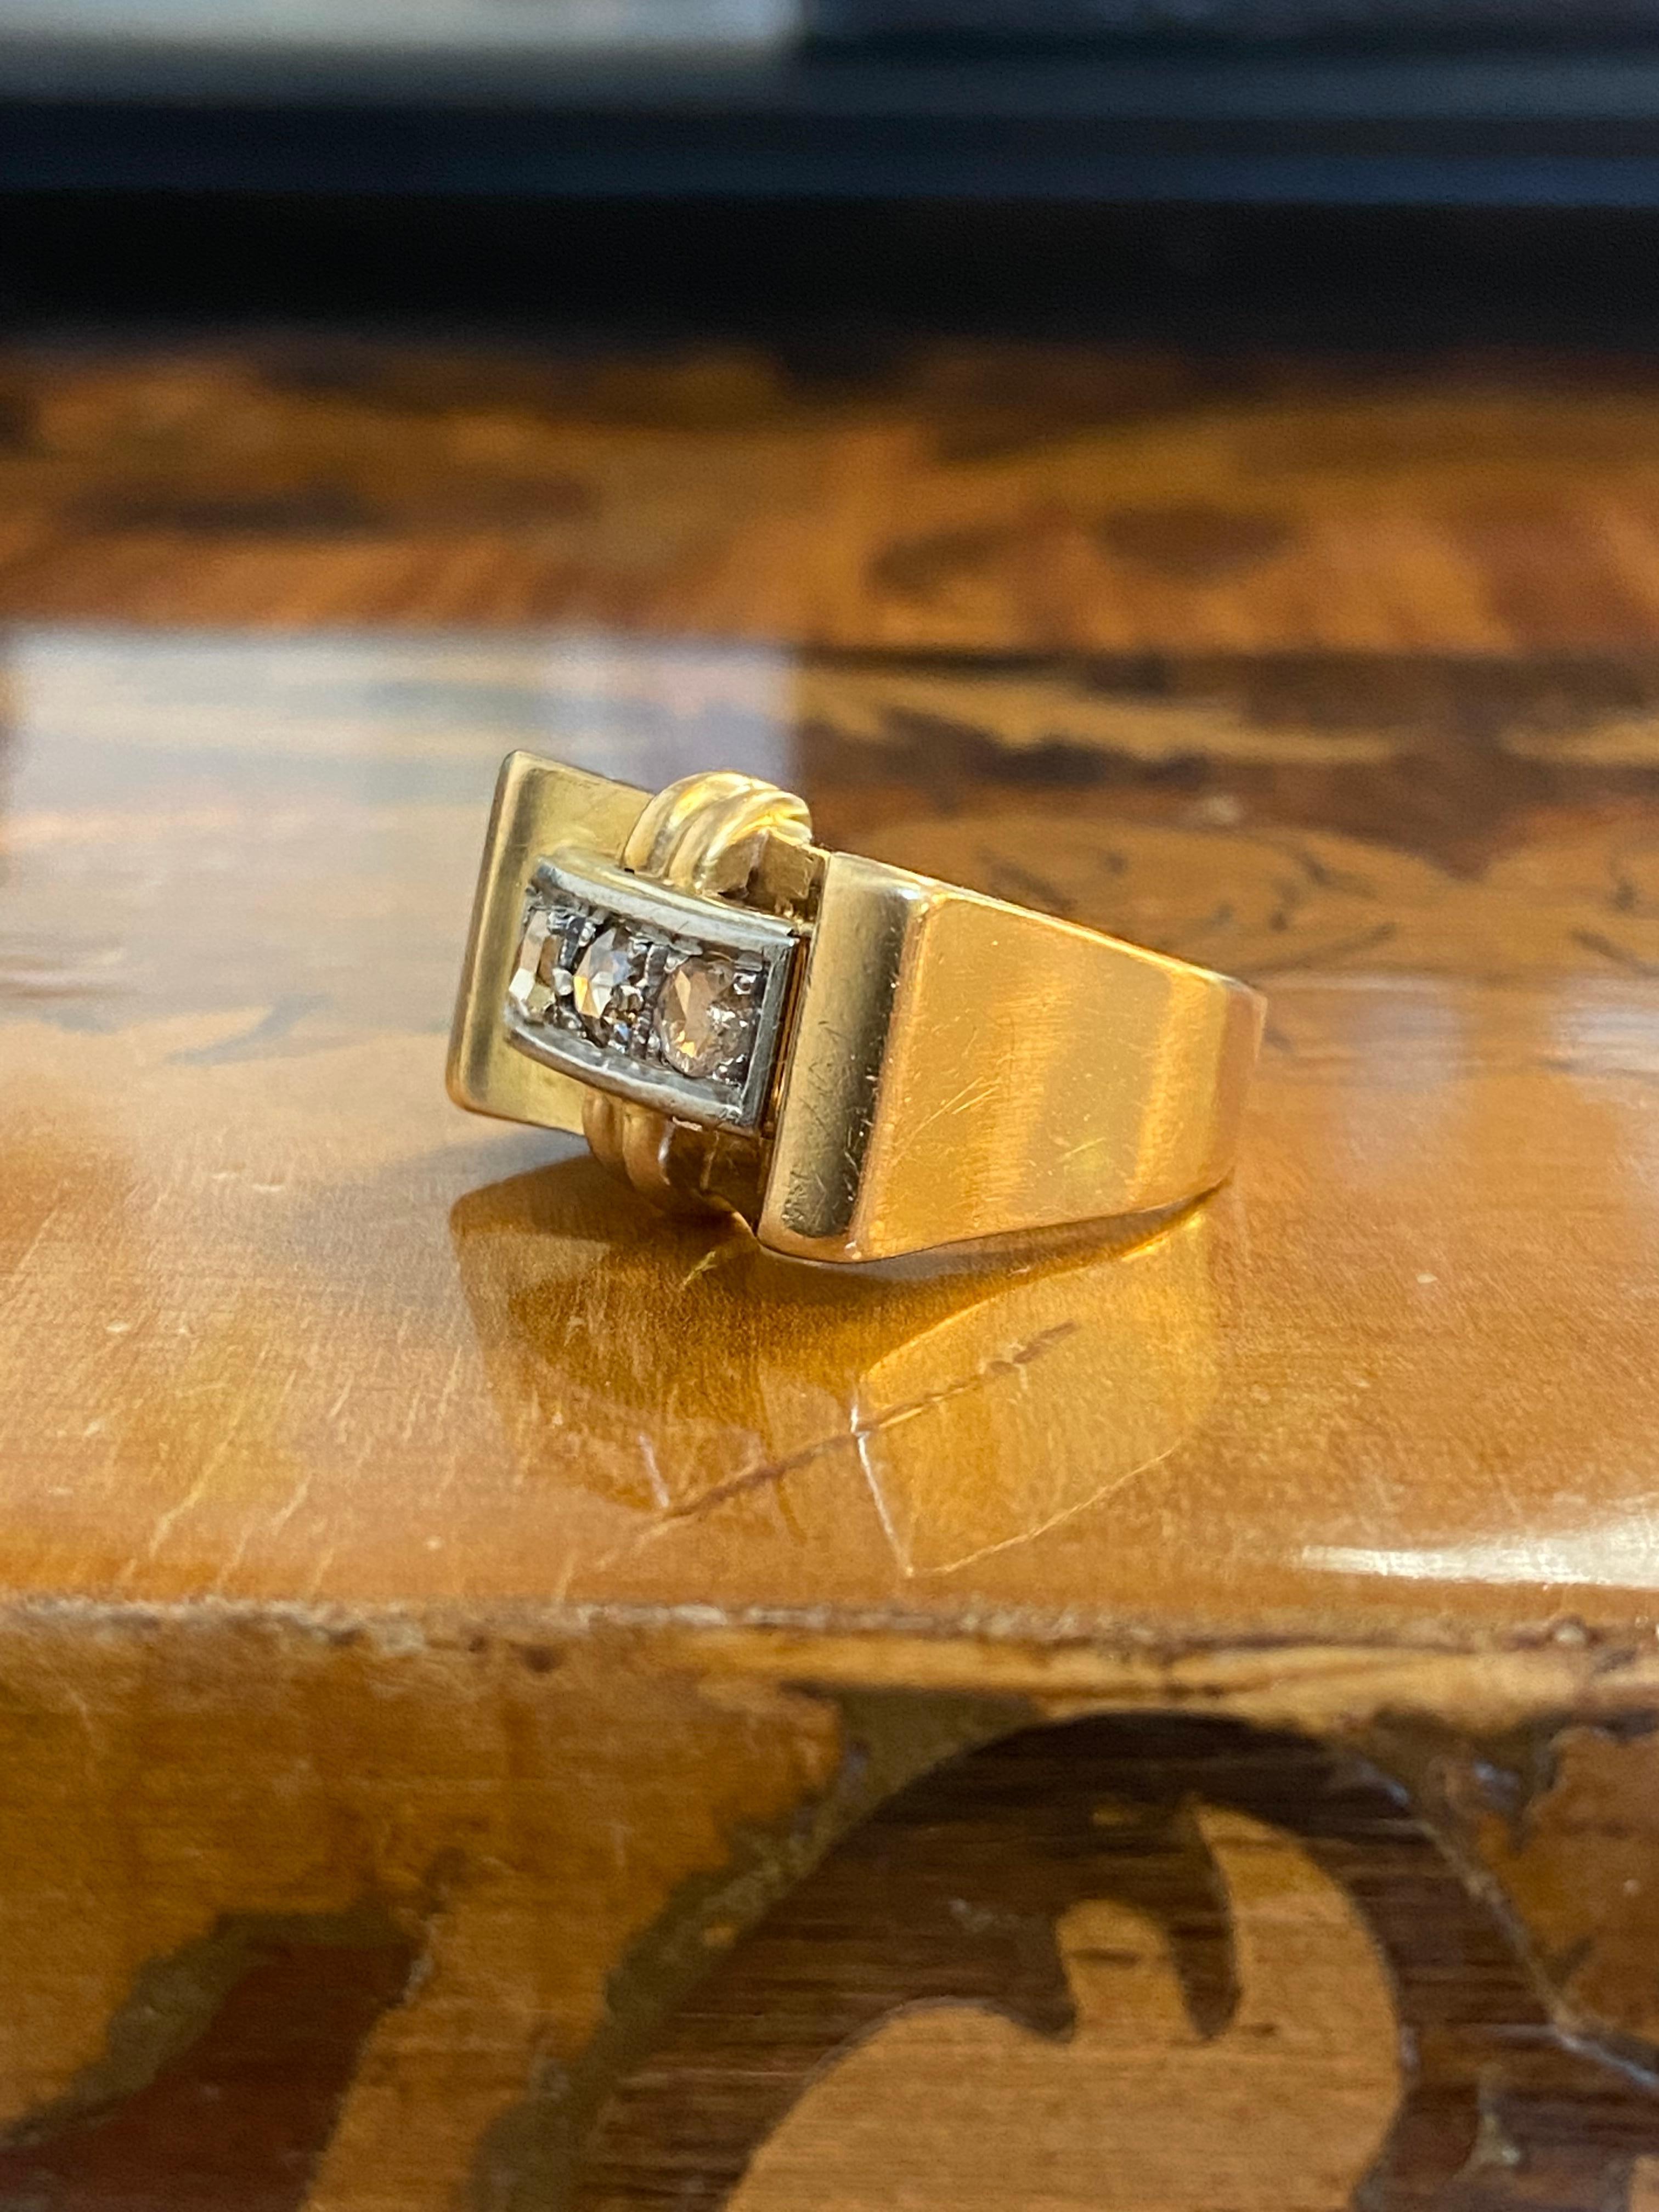 French 18k Rose Gold & Rose Cut Diamond Tank Ring Circa 1900s Victorian


Here is your chance to purchase a beautiful and highly collectible French ring.  Truly a great piece at a great price! 

Weight: 7.1 grams

Dimensions: 1/2